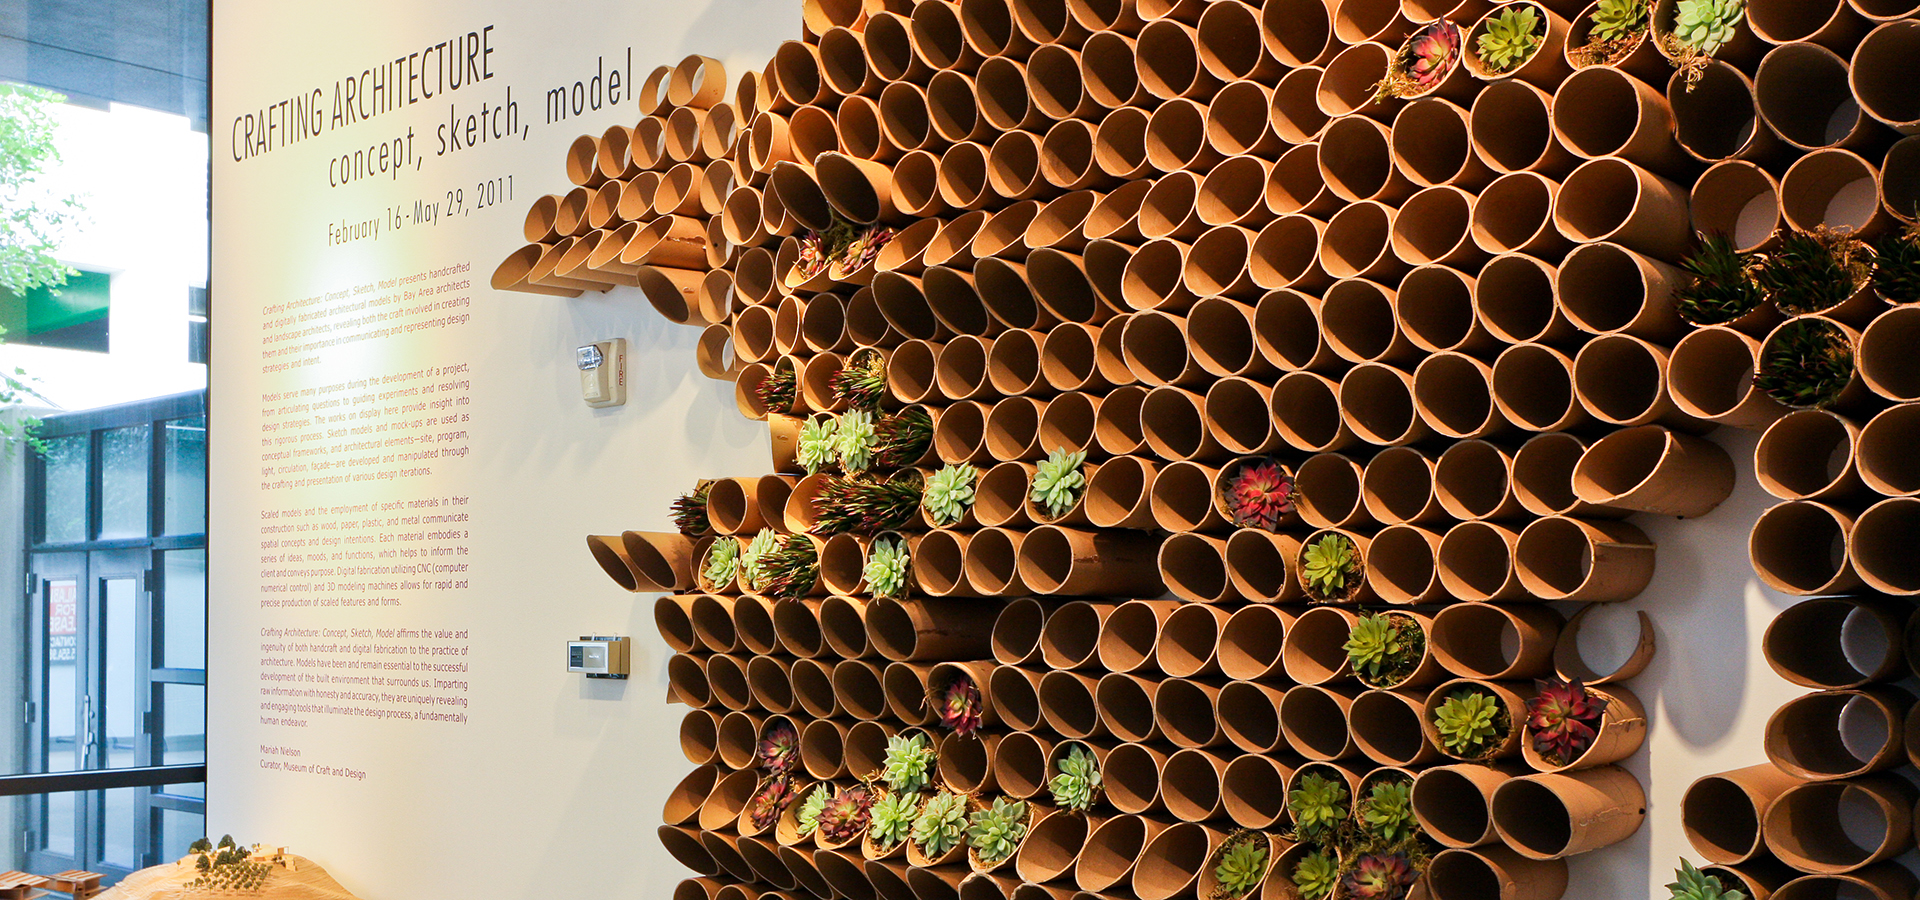 Photo of an exhibition marque wall with lots of small wooden circles coming out o f the wall holding plants.